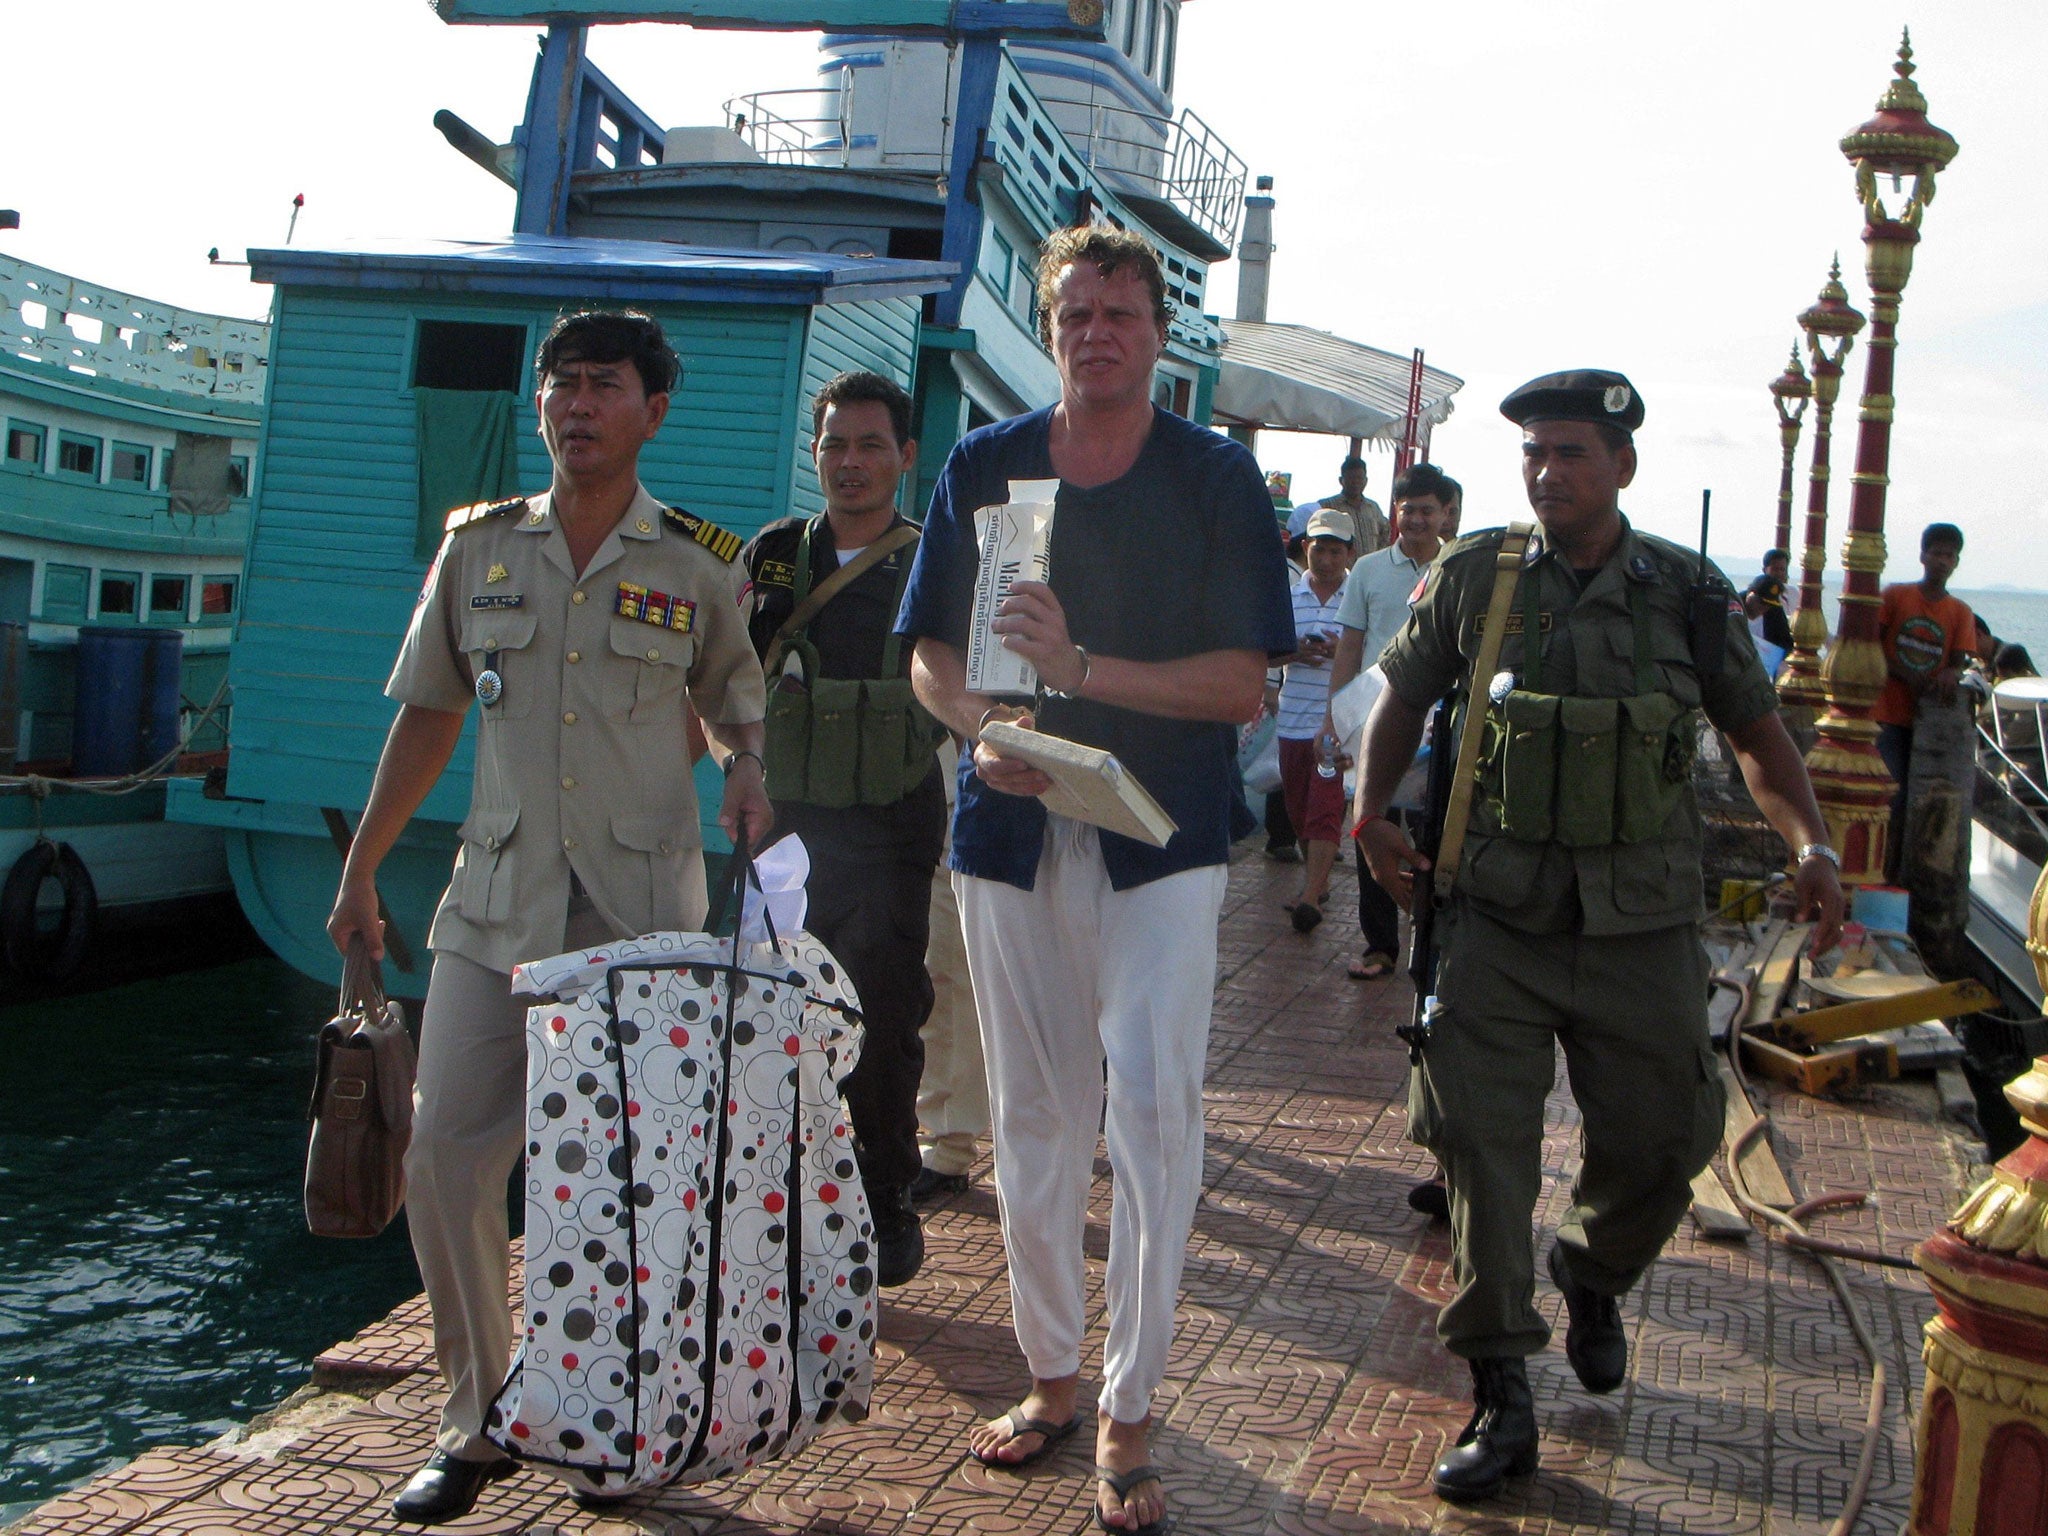 Russian tycoon Sergei Polonsky walks along with police officers after his arrest in Sihanoukville, southern Cambodia